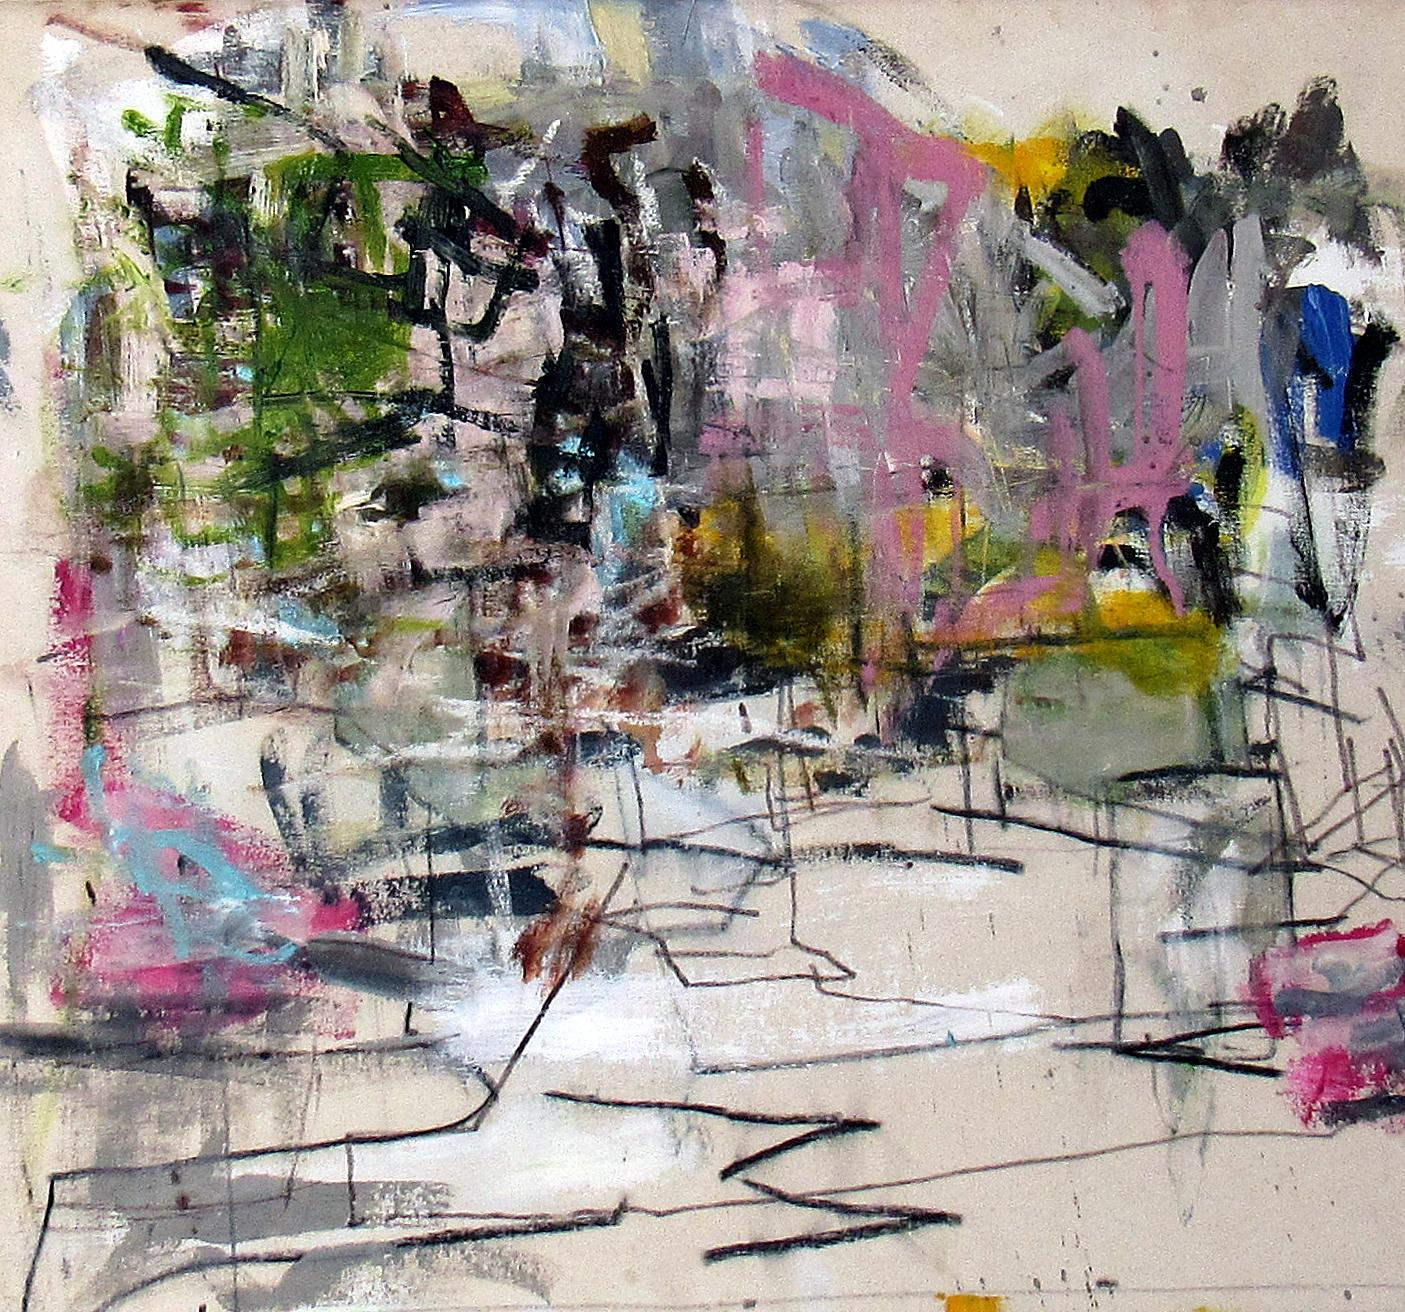 C. Dimitri Abstract Painting - West End, colorful gestural abstract painting